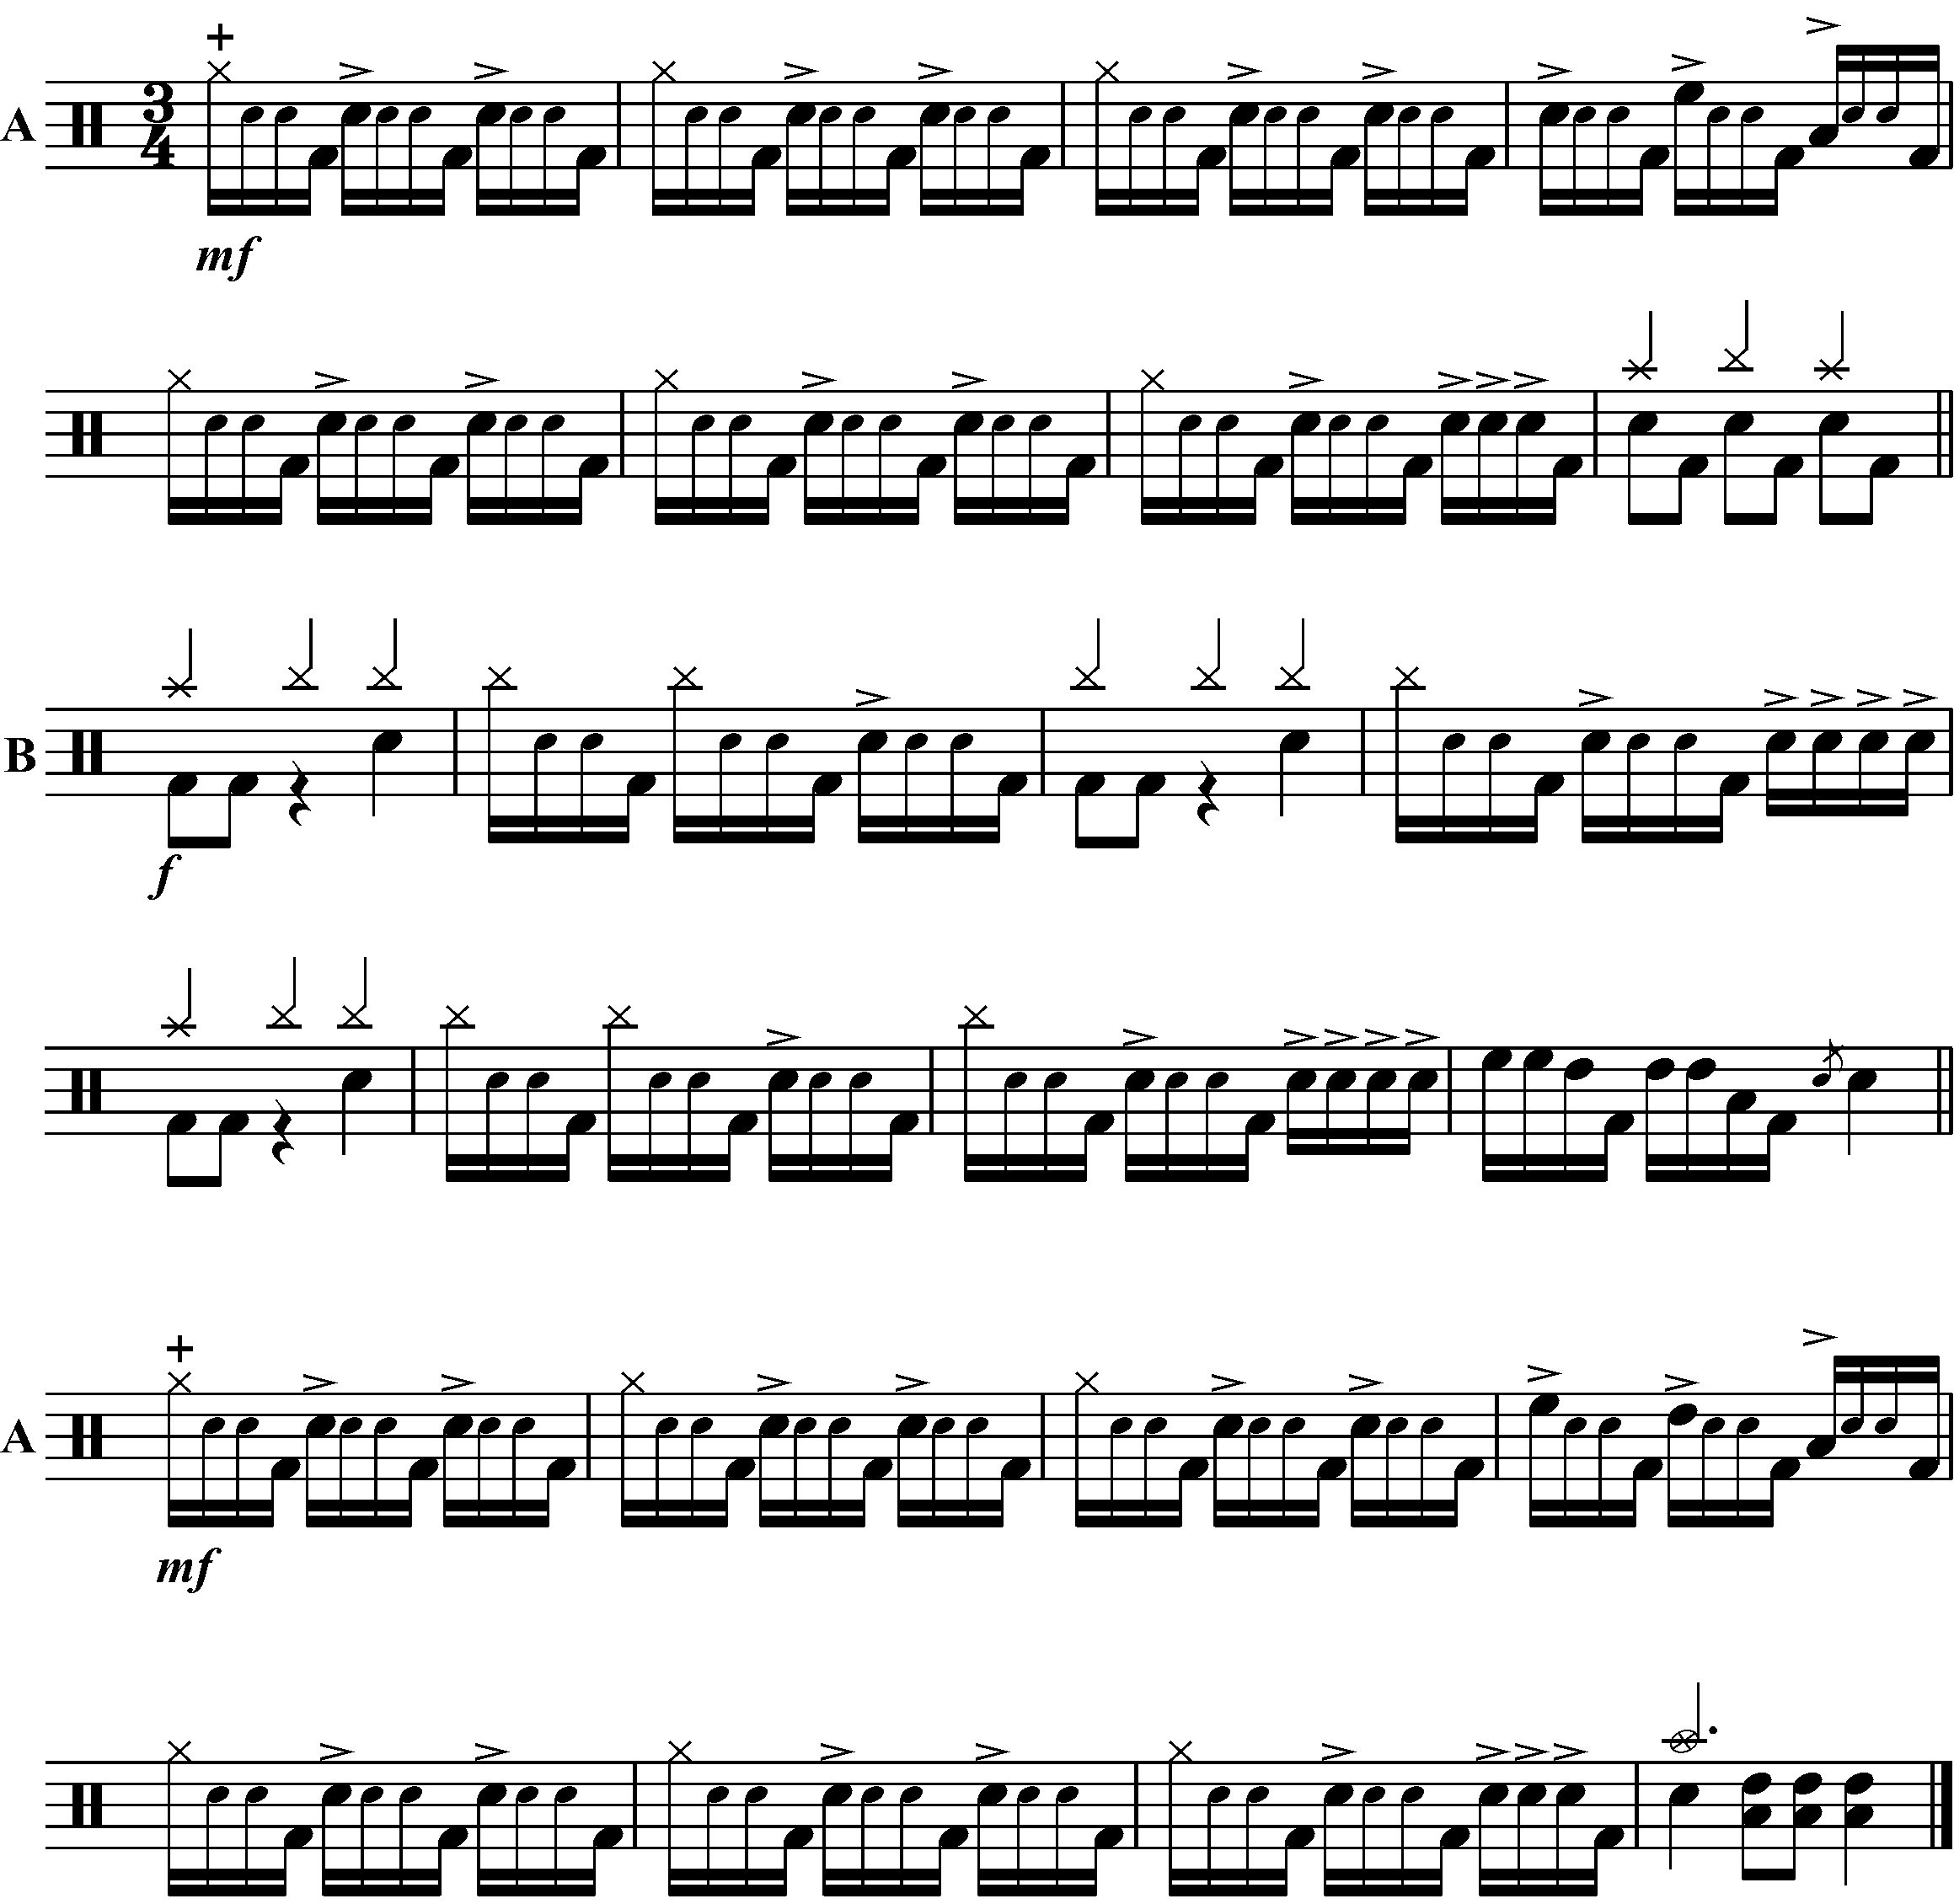 A piece using the groove